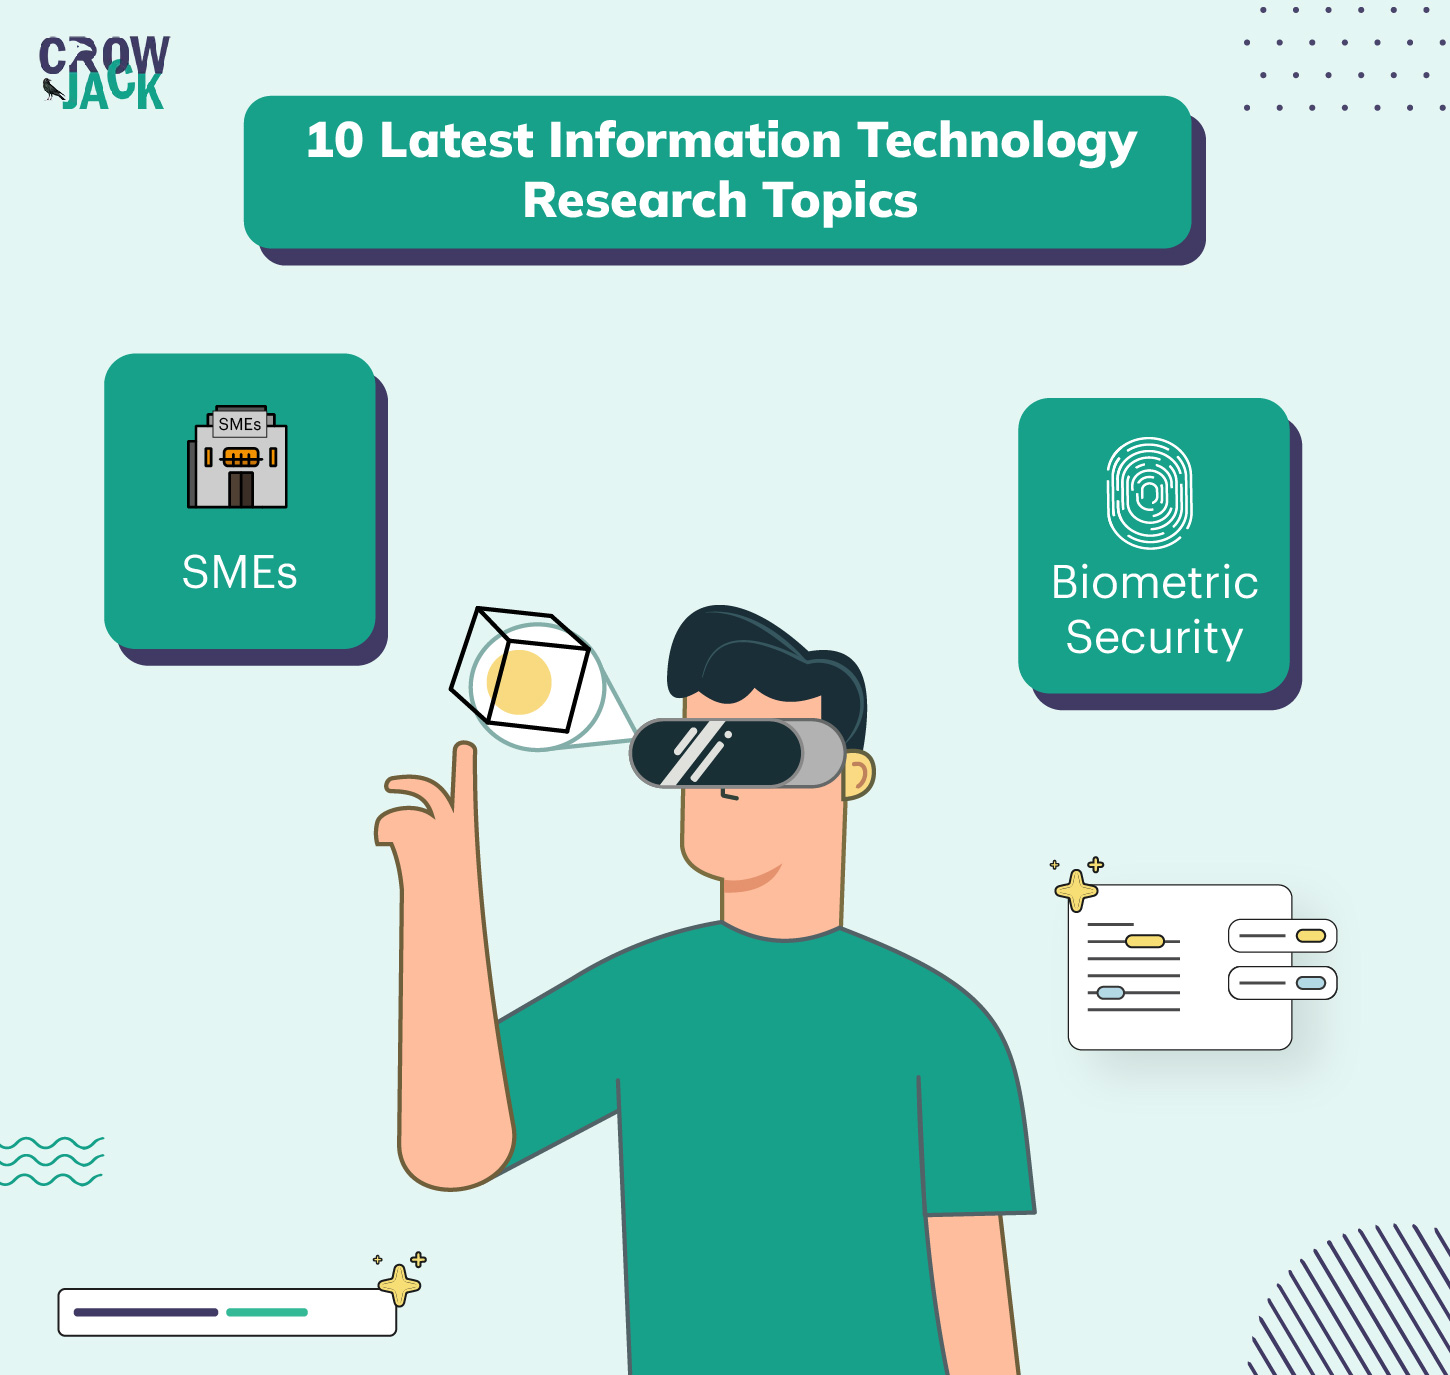 10 Latest Information Technology Research Topics